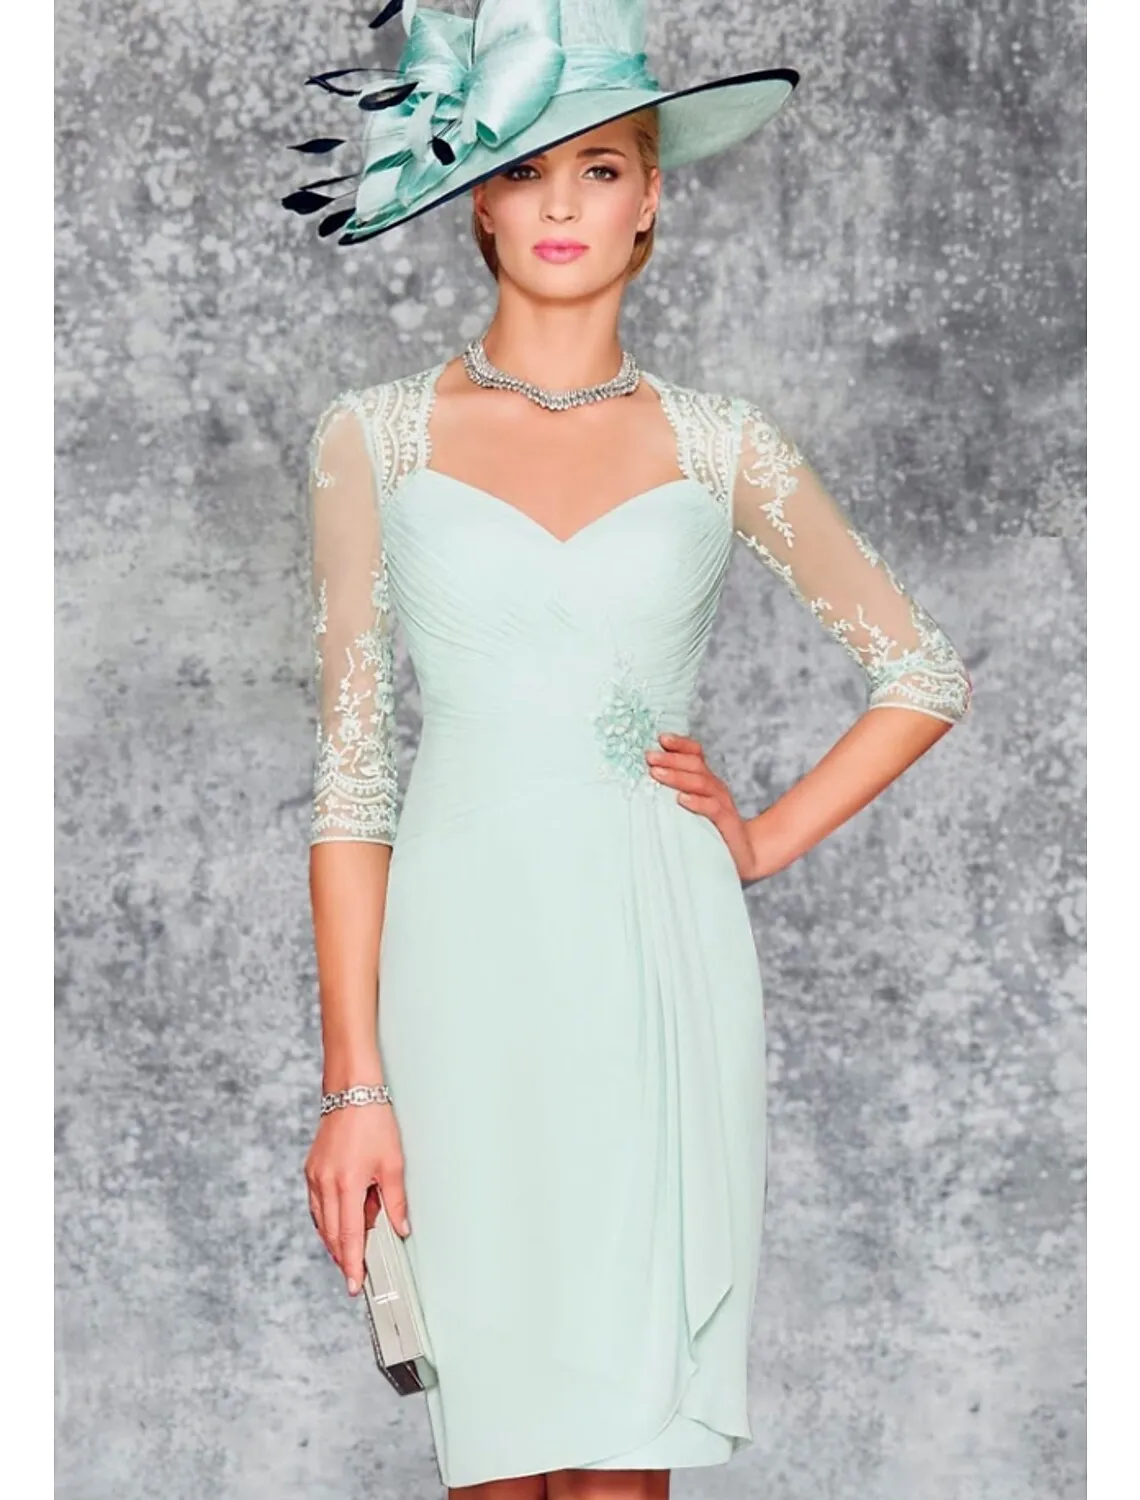 2022 Elegant Mint Green Mother of the Bride Dress See Through V Neck Knee Length Chiffon Lace Prom Party Gown Robe De Soriee